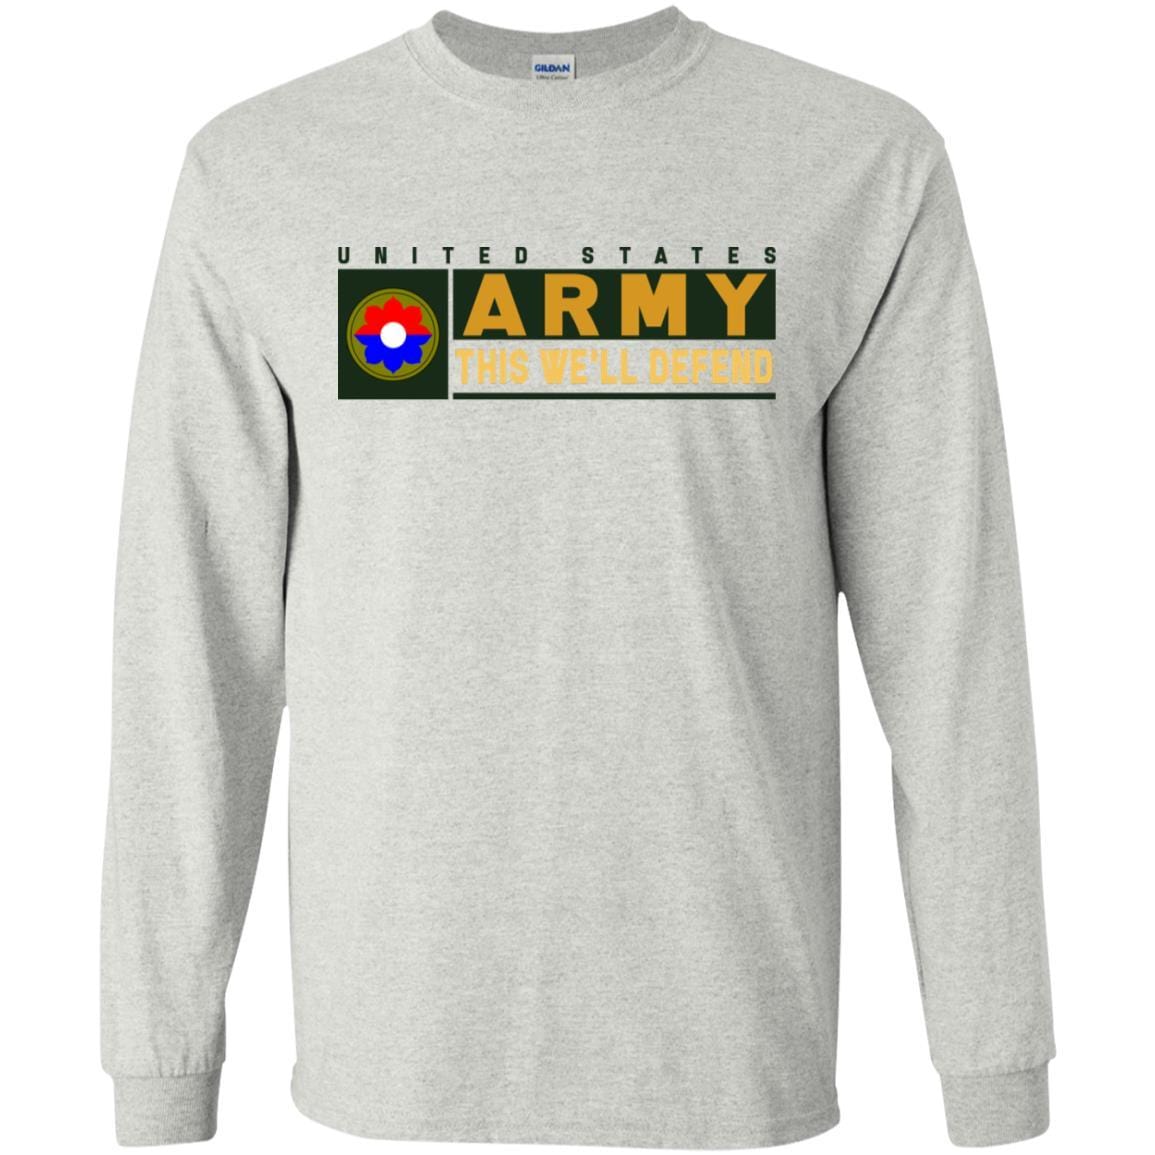 US Army 9th Infantry Division- This We'll Defend T-Shirt On Front For Men-TShirt-Army-Veterans Nation